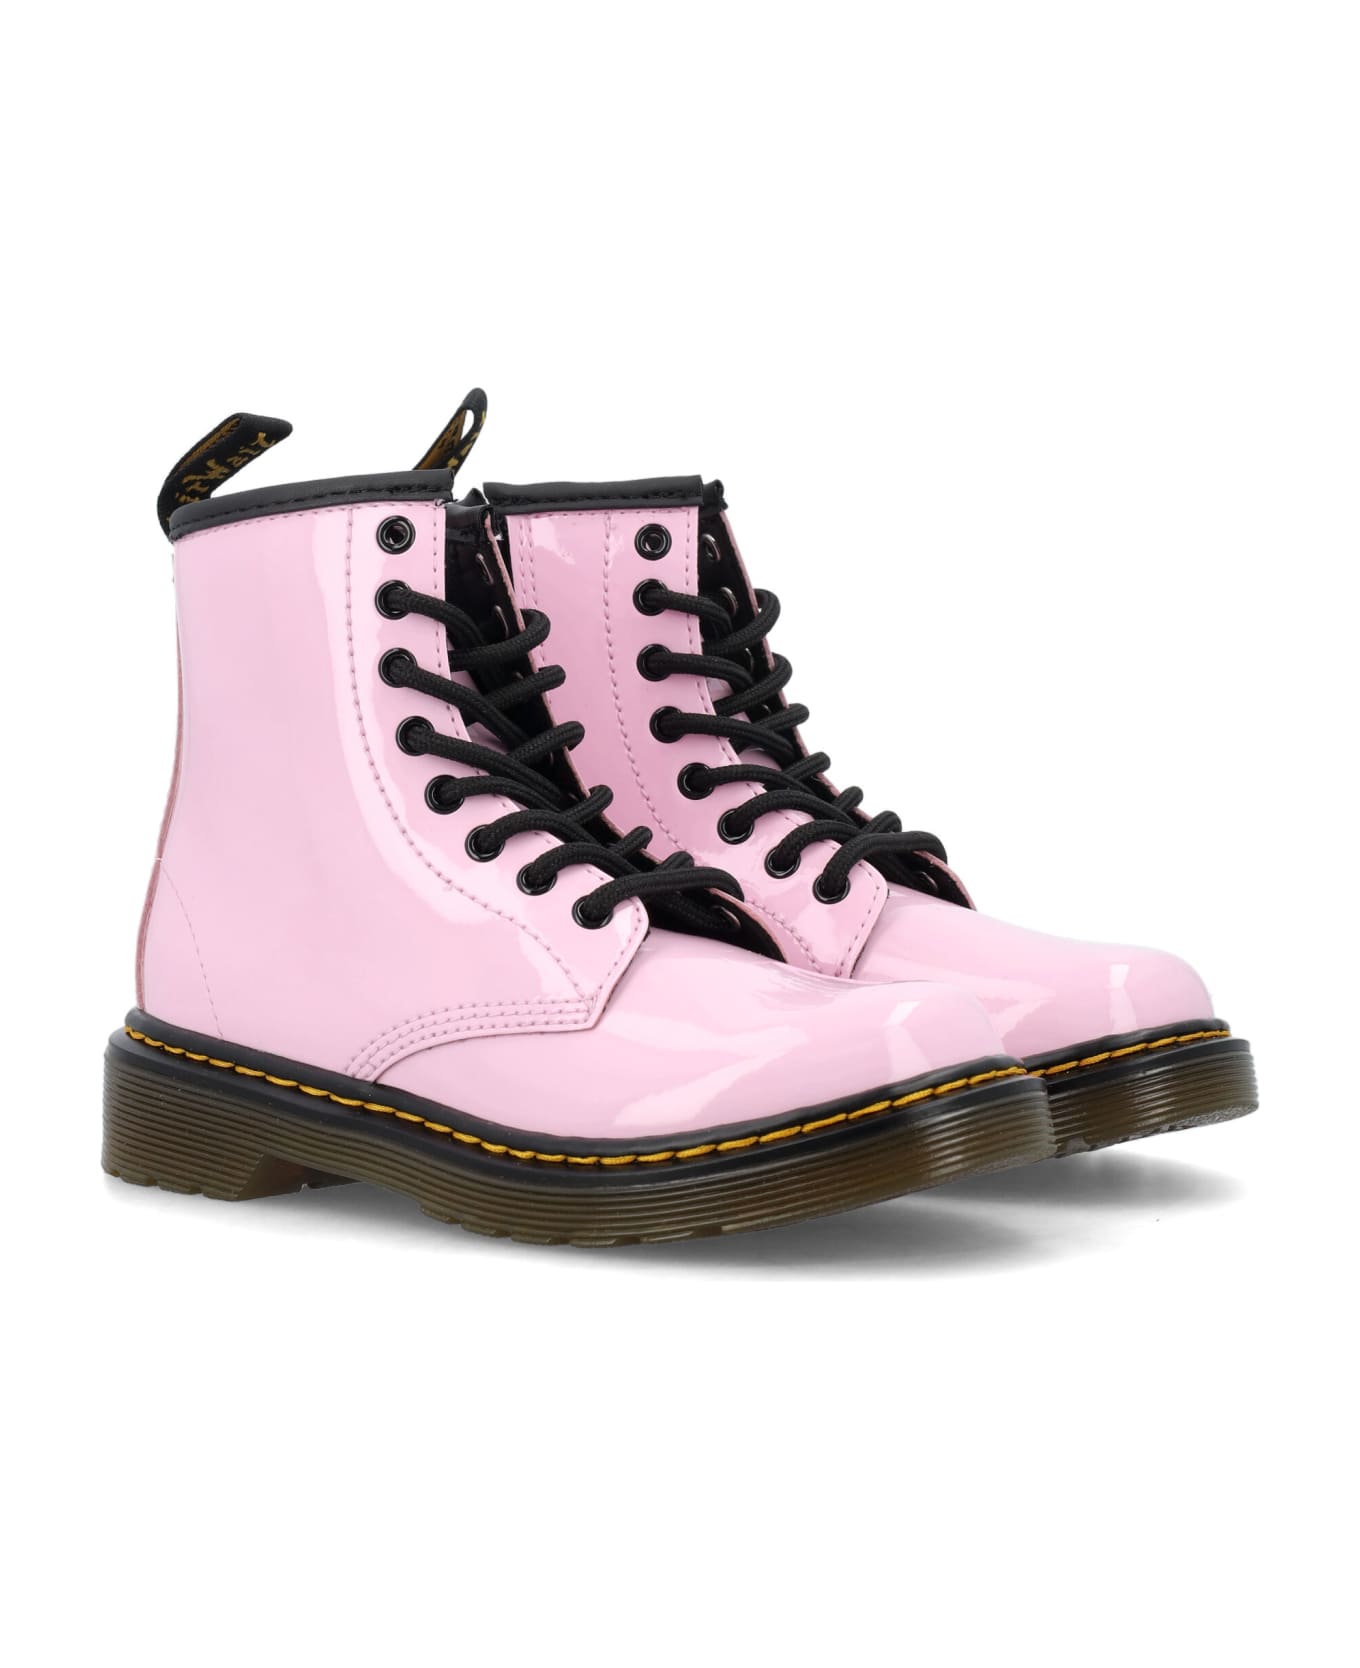 Dr. Martens 1460 Lace-up Boots - PINK